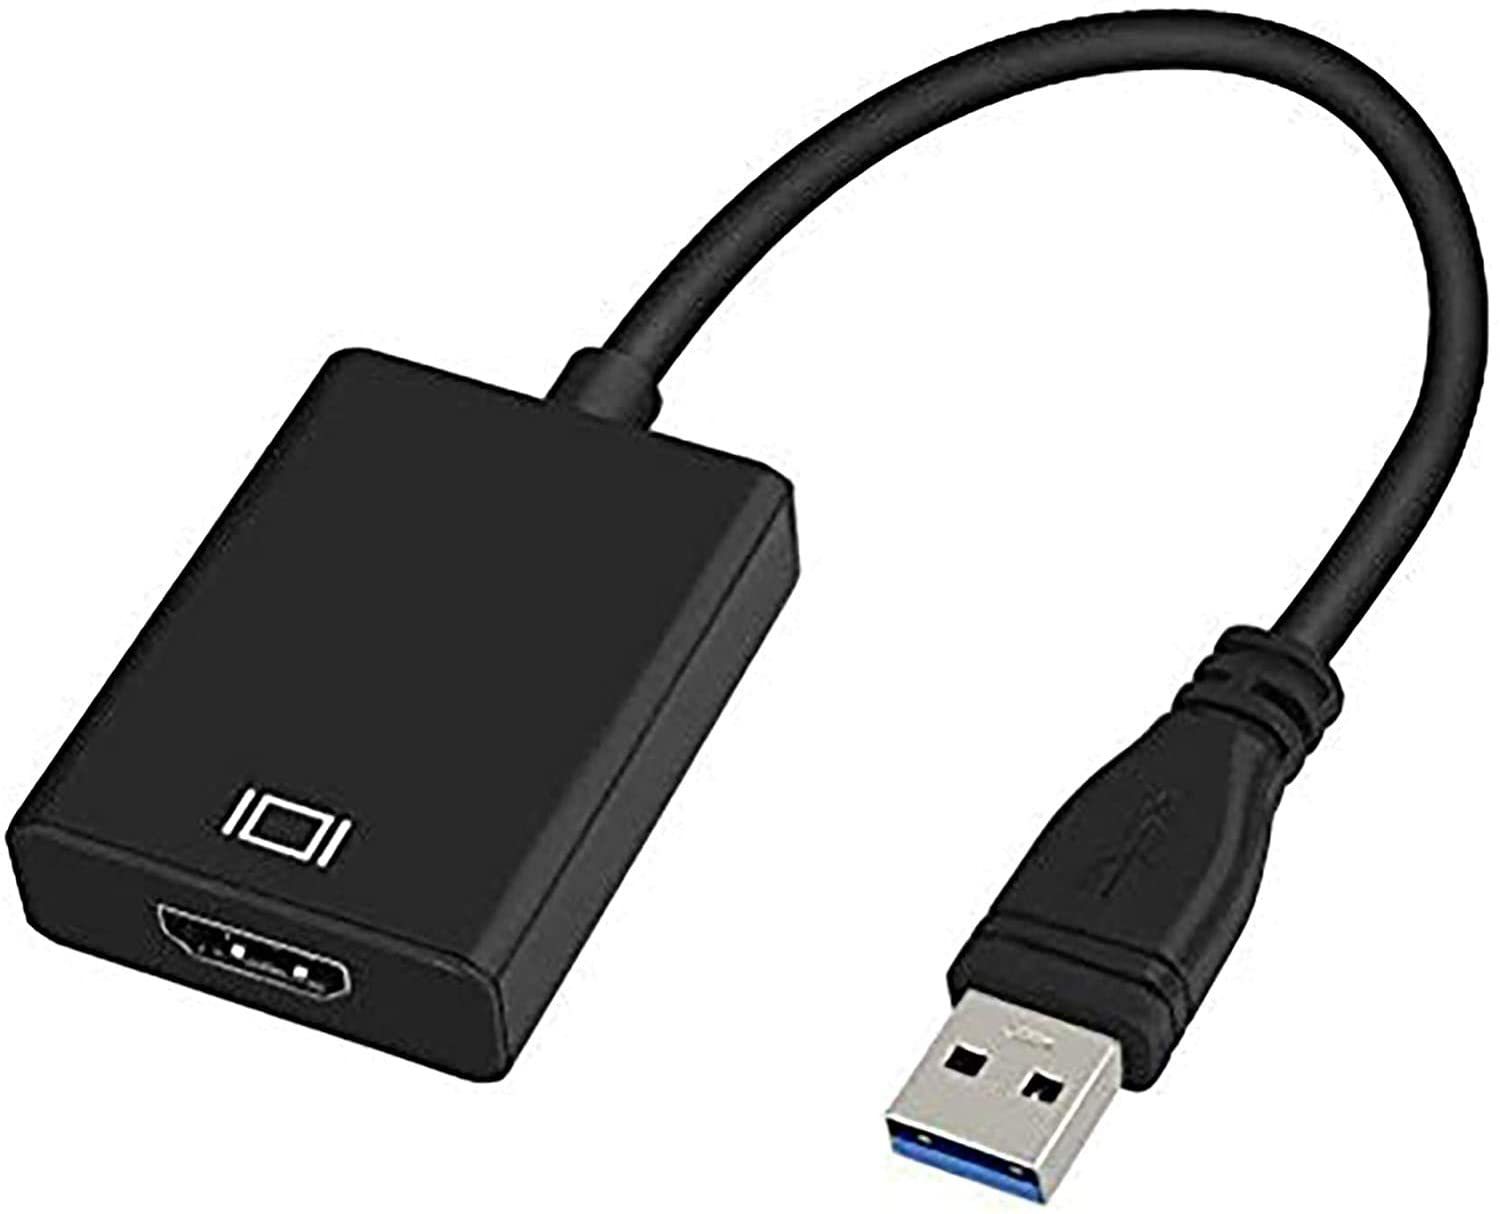 USB to HDMI Adapter, 1080P HD Audio Video Converter,USB 3.0/2.0 to HDMI Multiple